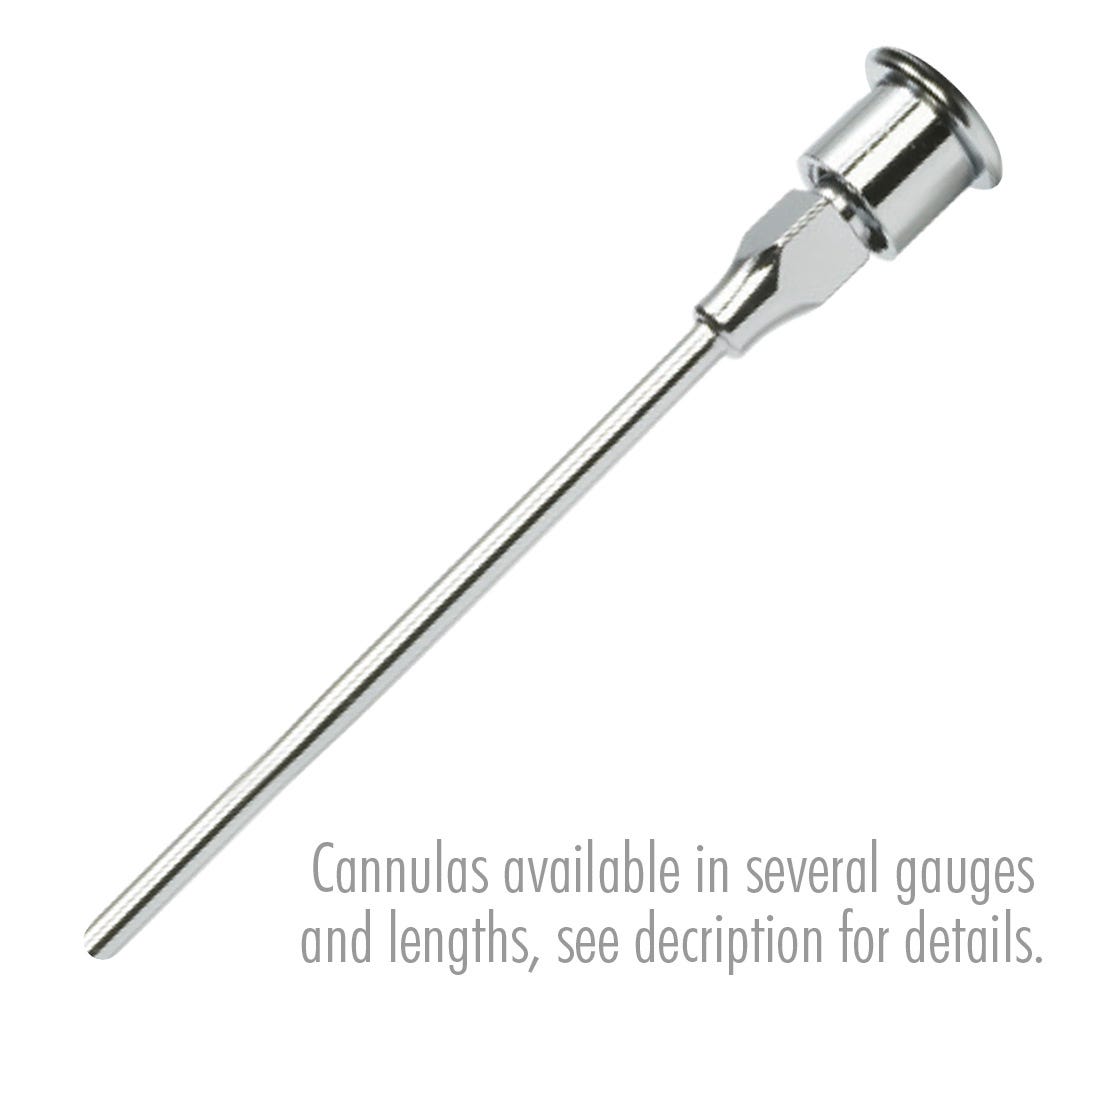 ACE Irrigation Cannula- Stainless Steel 18g x 3", straight